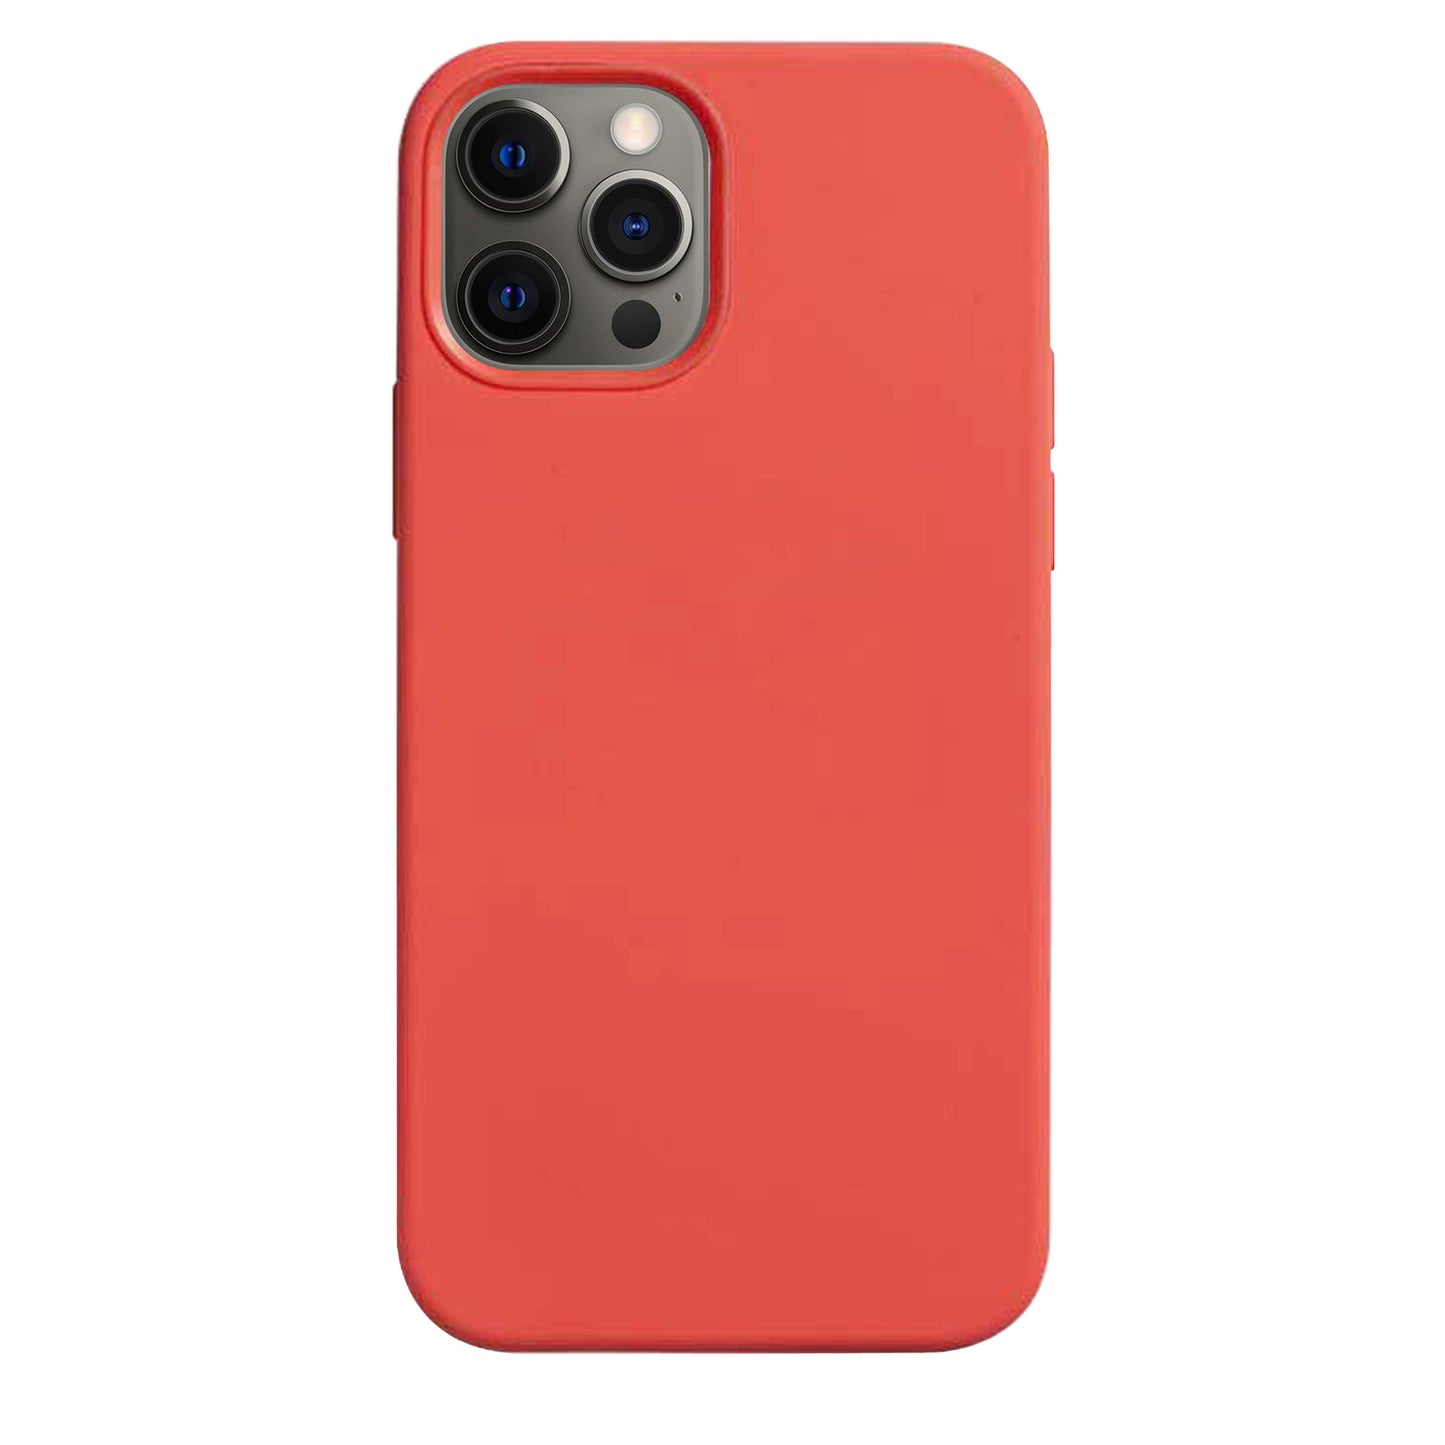 Pink Citrus Silicone Case for iPhone